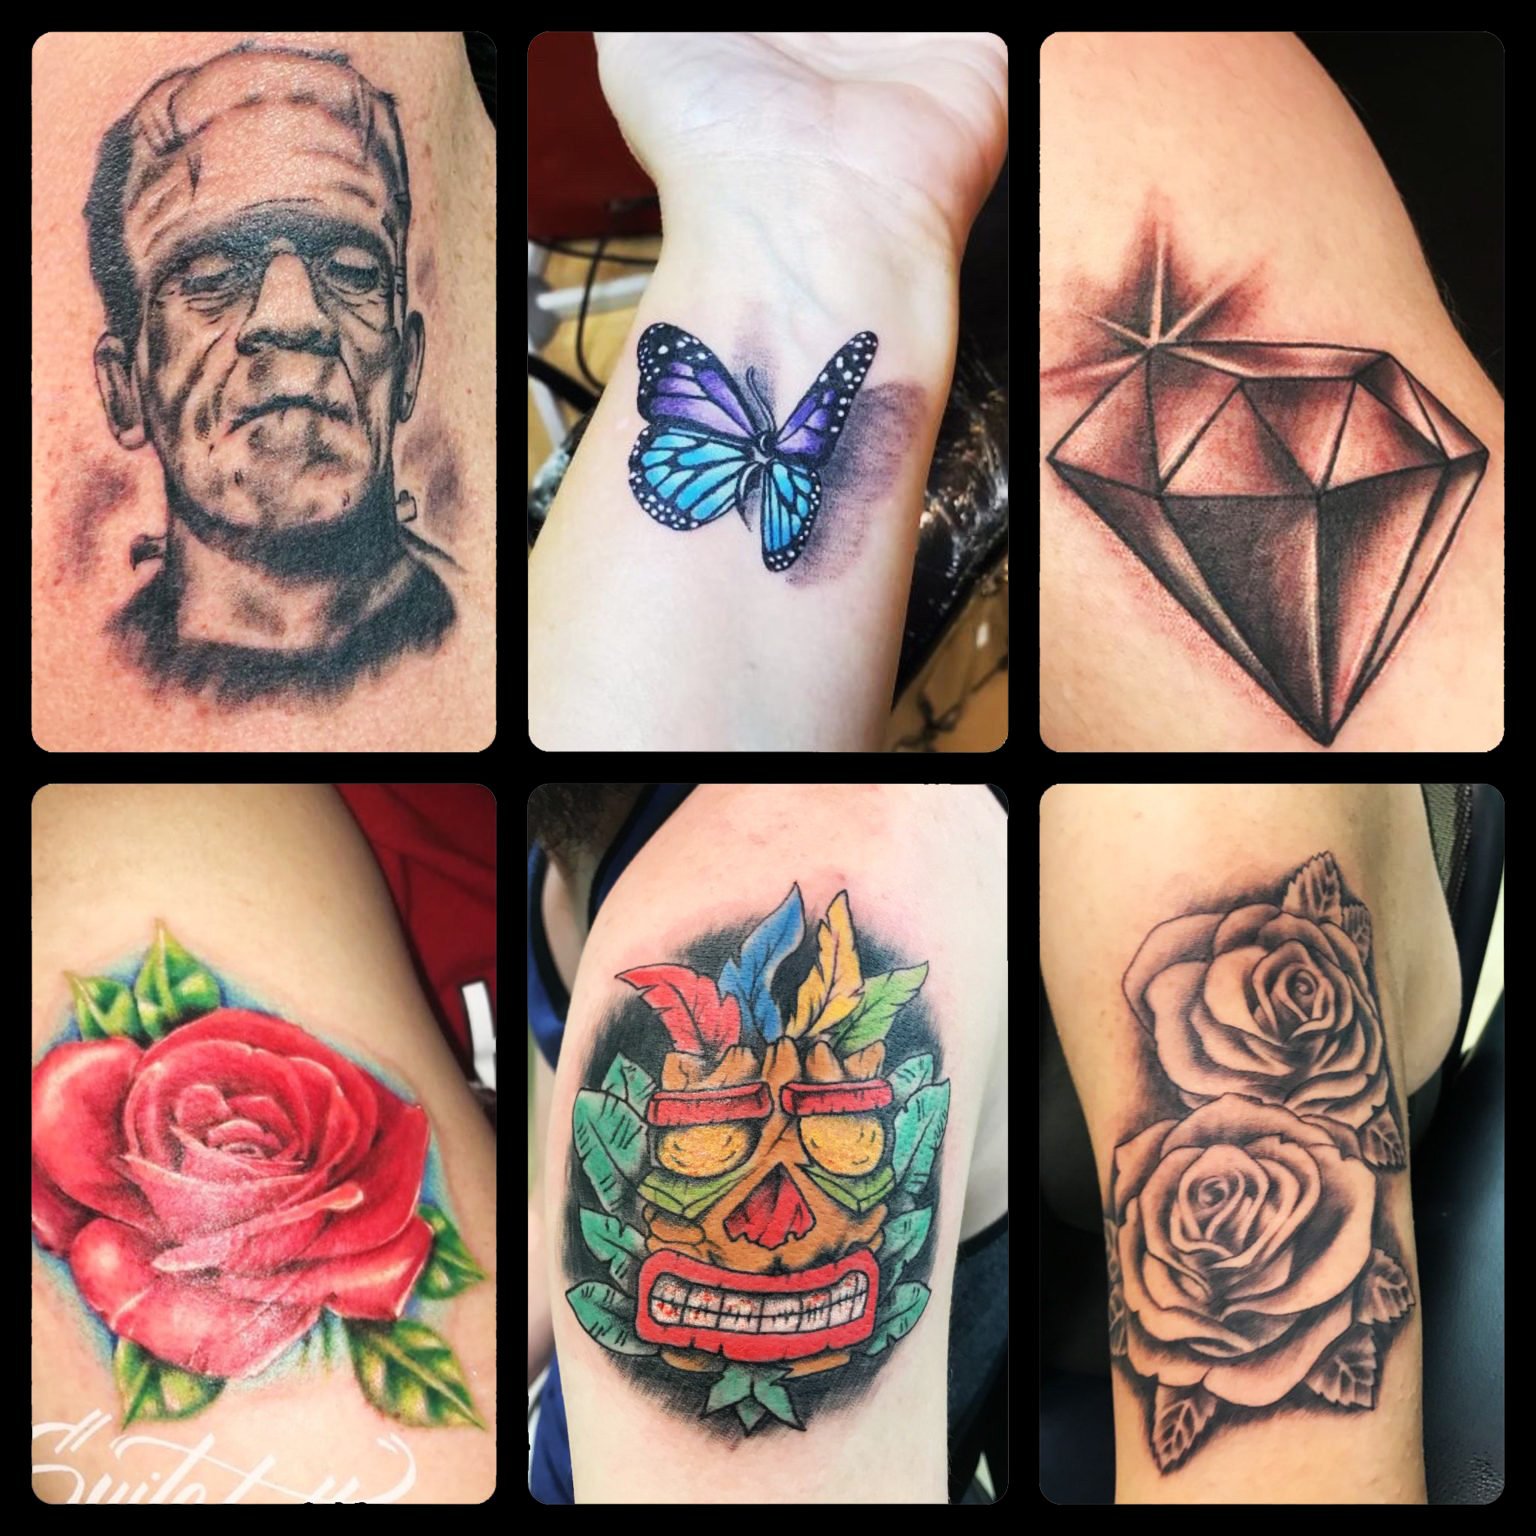 WE WILL PAY FOR YOUR GAS  Tattoos Las Vegas Strip  7025865308  Best  Tattoos Las Vegas Strip